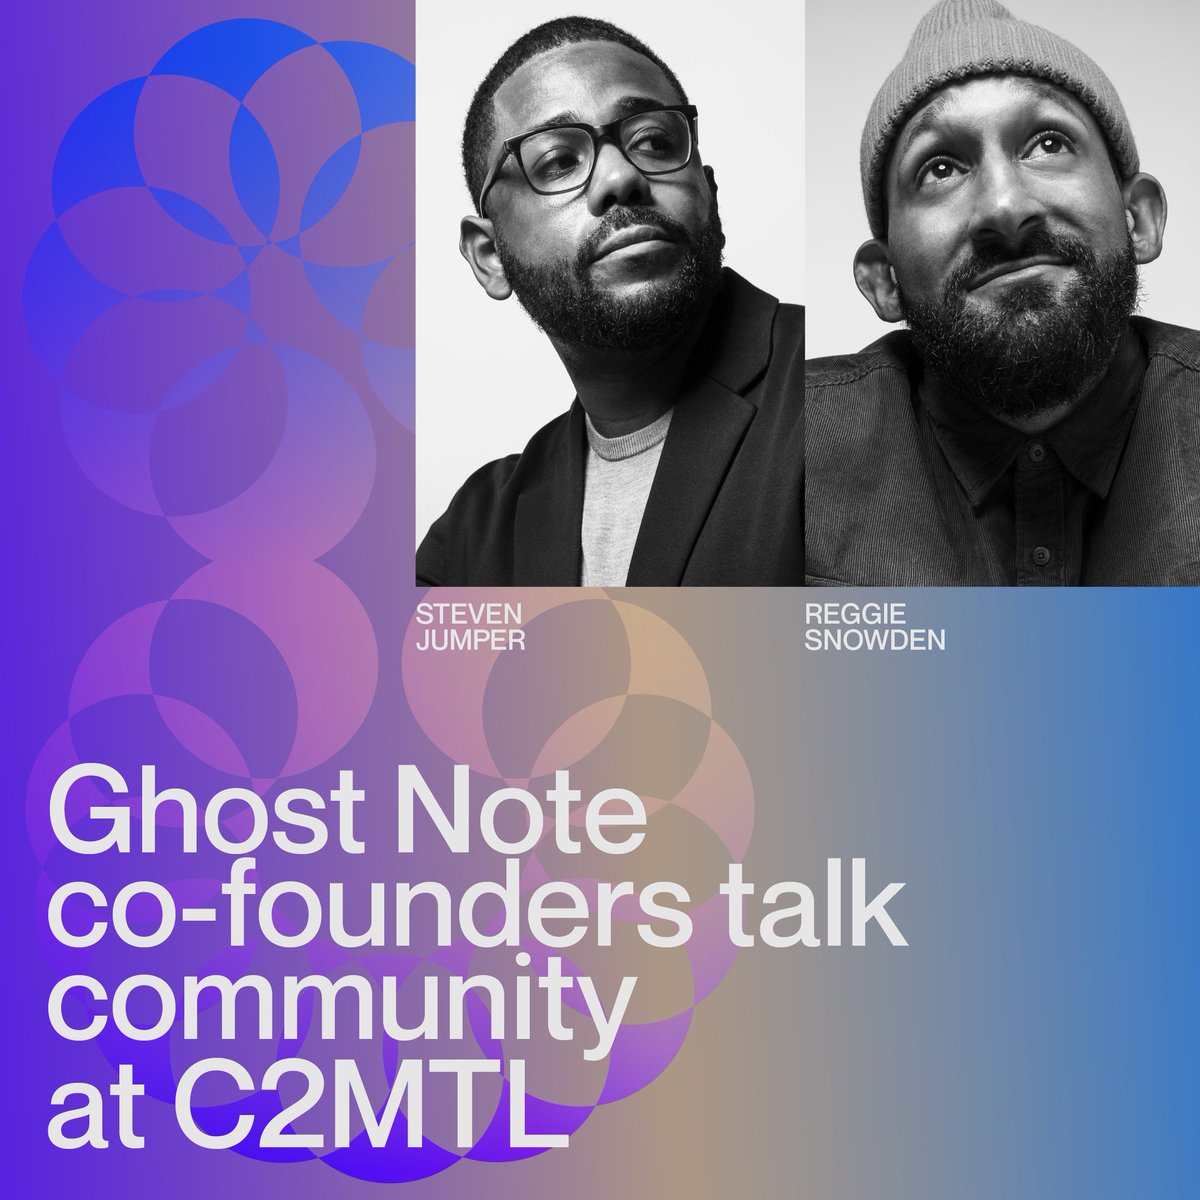 A relationship based on connection is an art that @GhostNoteAgency's Steven Jumper & Reggie Snowden know about. At #C2MTL23, they will join @Dentsu Canada's Stephen Kiely to talk community, not just transactions. Right message. Right people. Right here: c2montreal.com